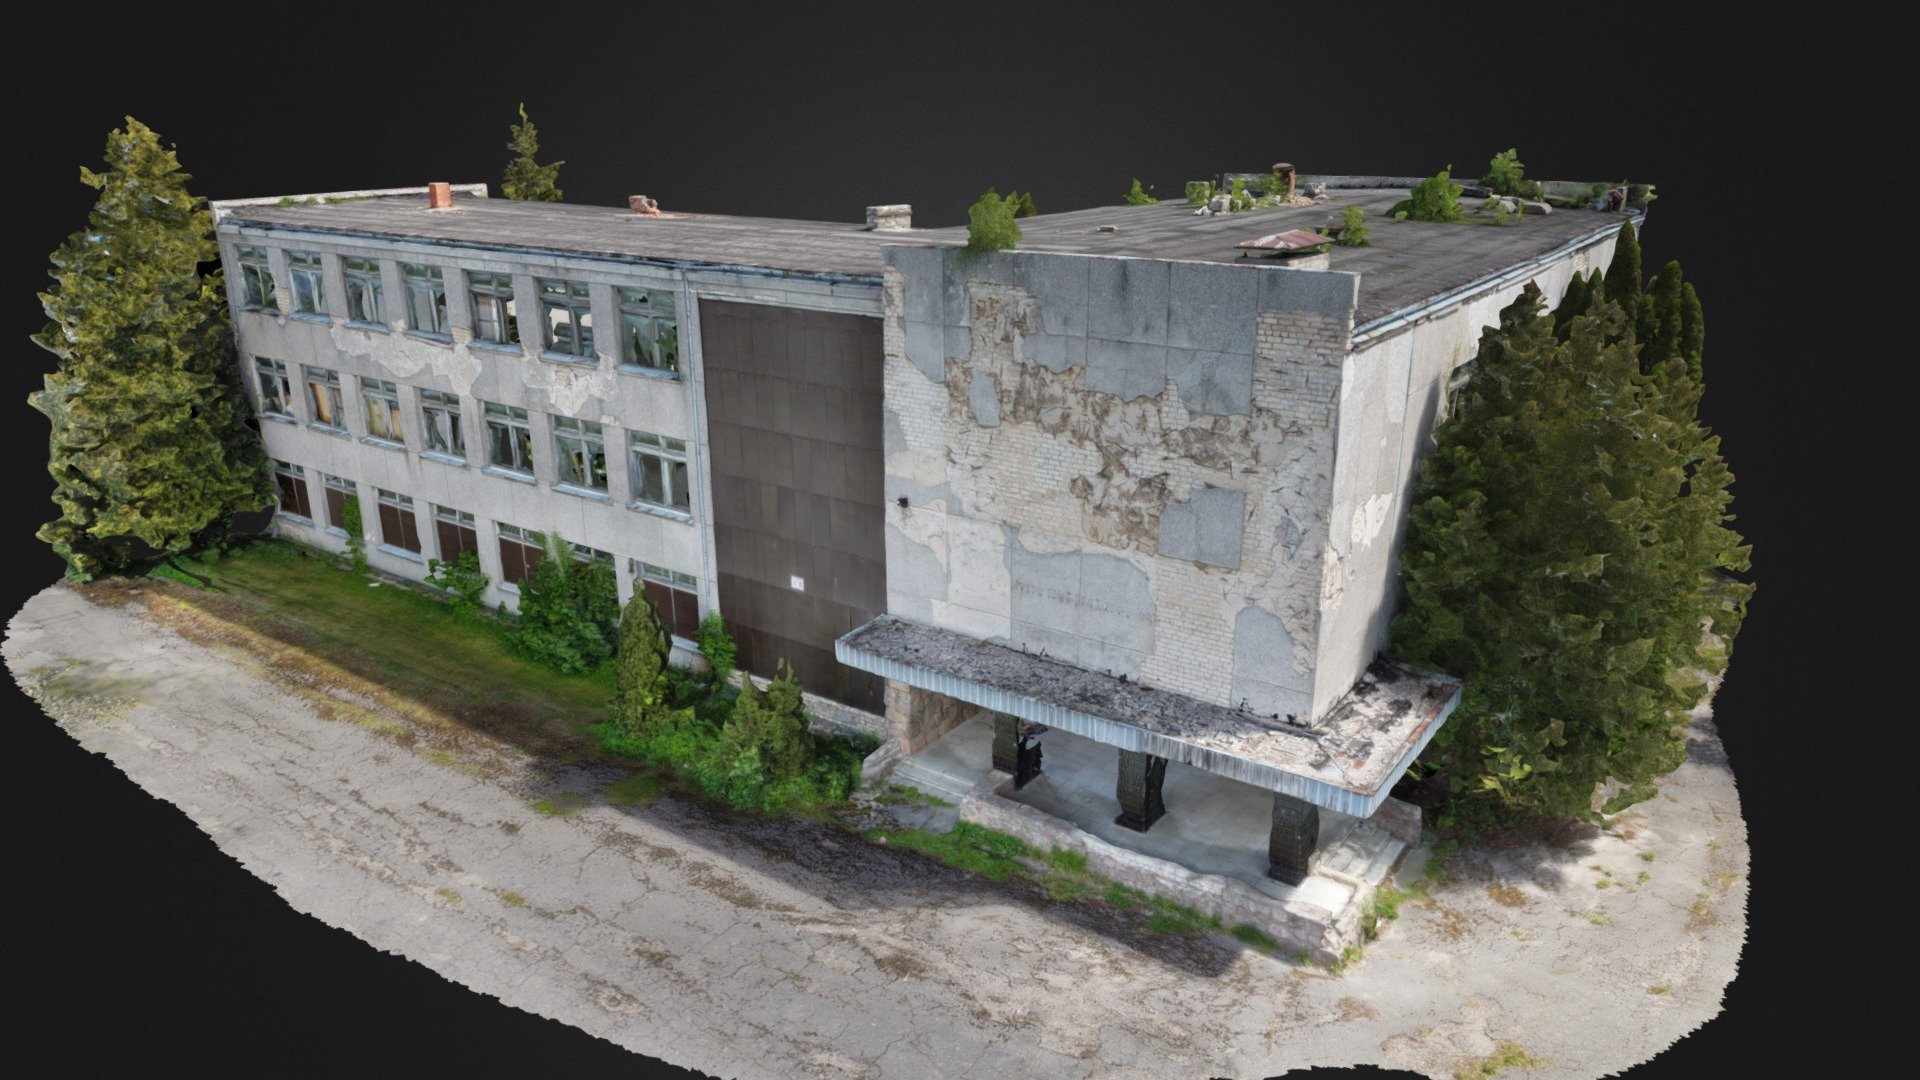 Contact me for a higher poly count model.

3D scan of an old, abandoned derelict soviet school.

Old walls, chipped concrete, bricks showing, dirty roof, boarded up entrance.

With normal map 3d model